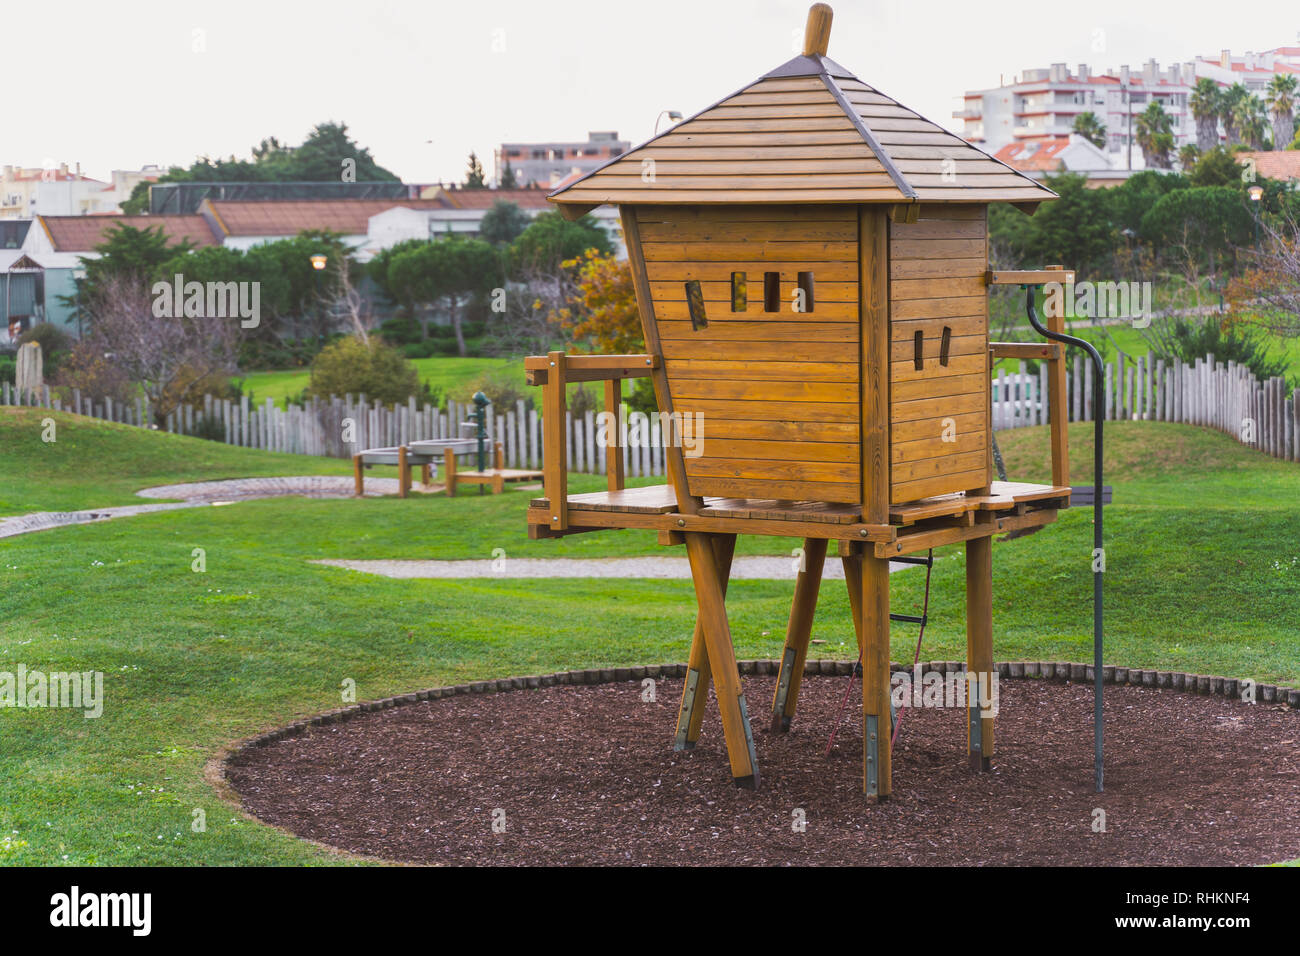 Yellow brown wooden tree house, kids playground equipment at park with green grass, bushes, trees, and a wooden fence, Oeiras Portugal Stock Photo